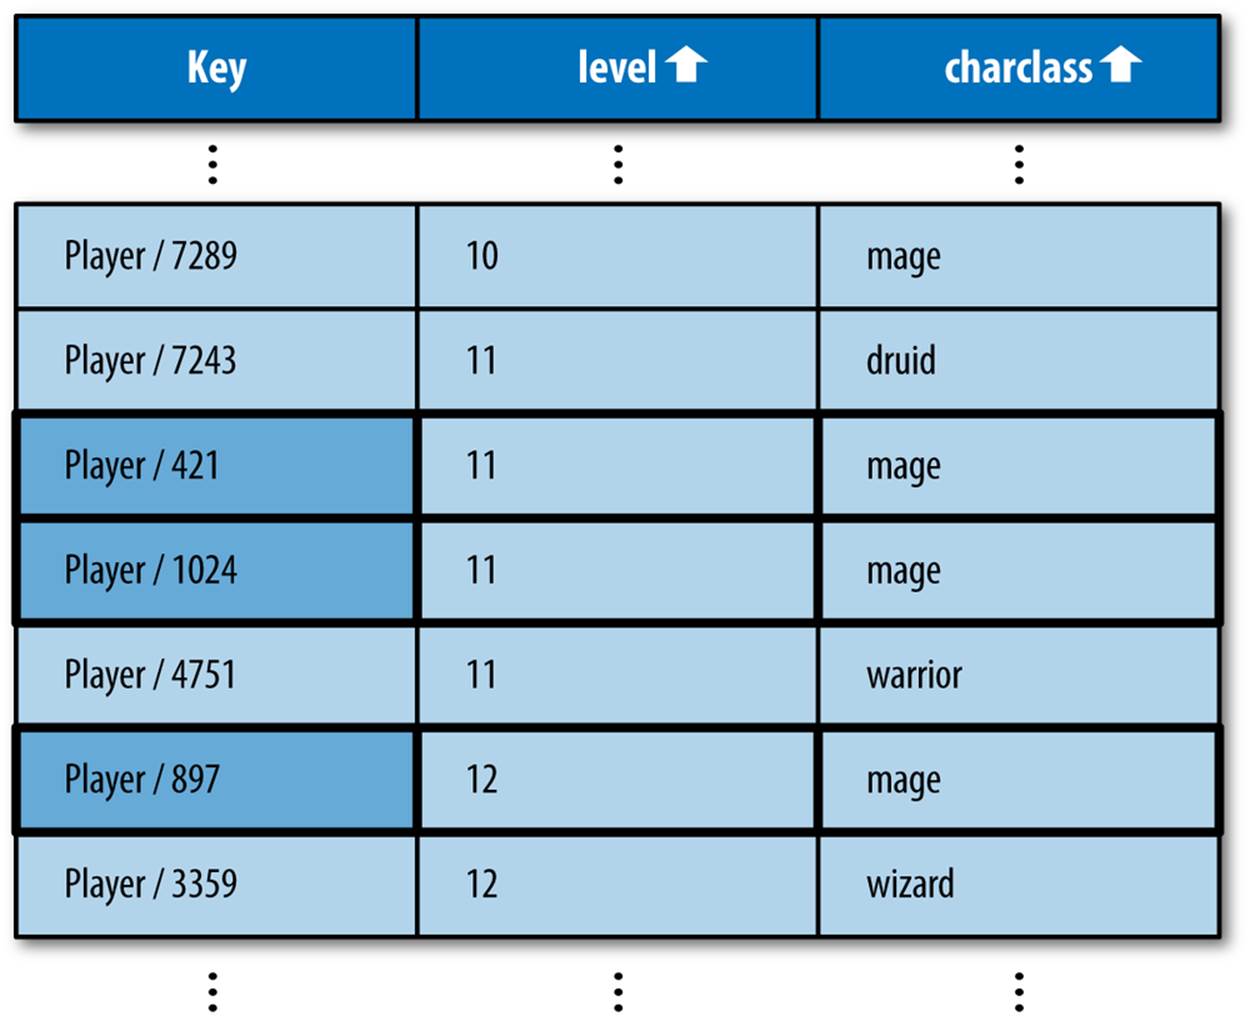 An index of the Player entity “charclass” and “level” properties, sorted first by level then by charclass, which cannot satisfy WHERE charclass = “mage” AND level > 10 with consecutive rows